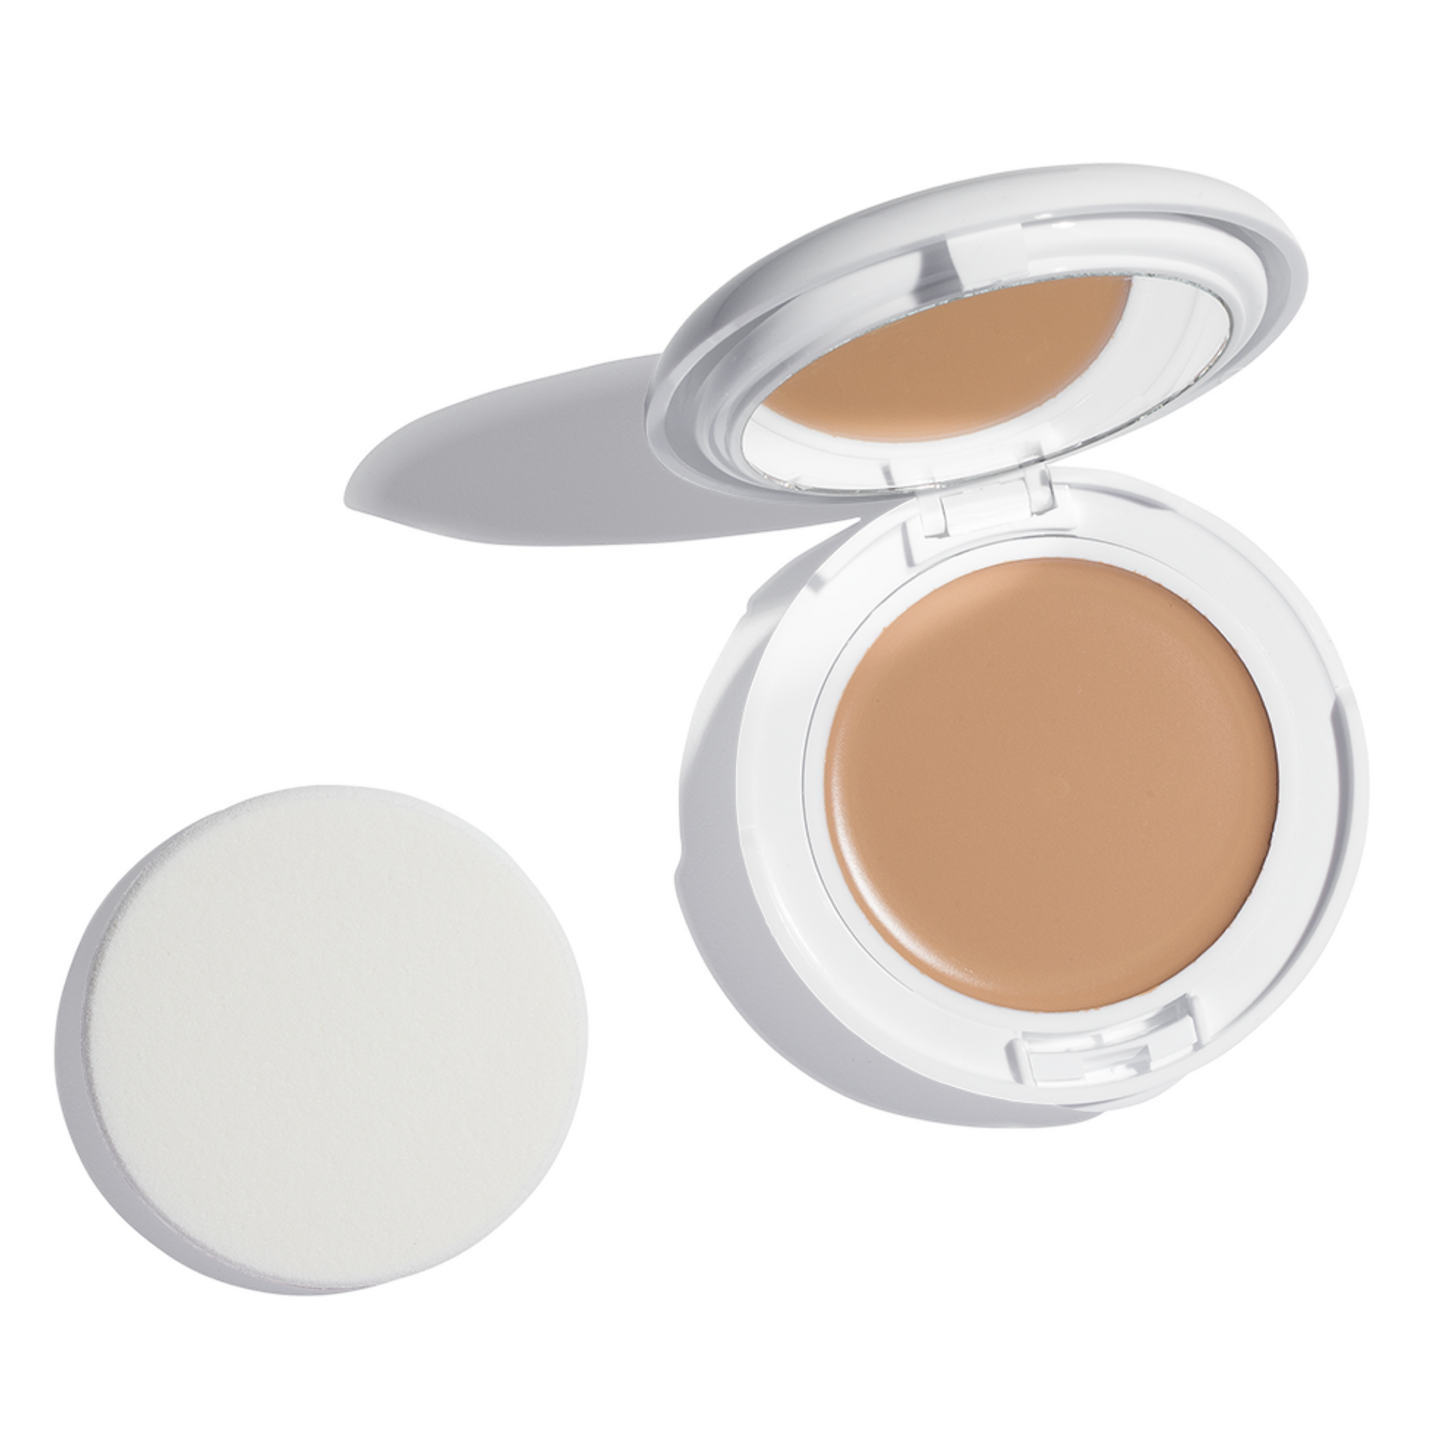 Primary image of  Mineral High Protection Tinted Compact SPF 50 - Beige Open Compact With Puff